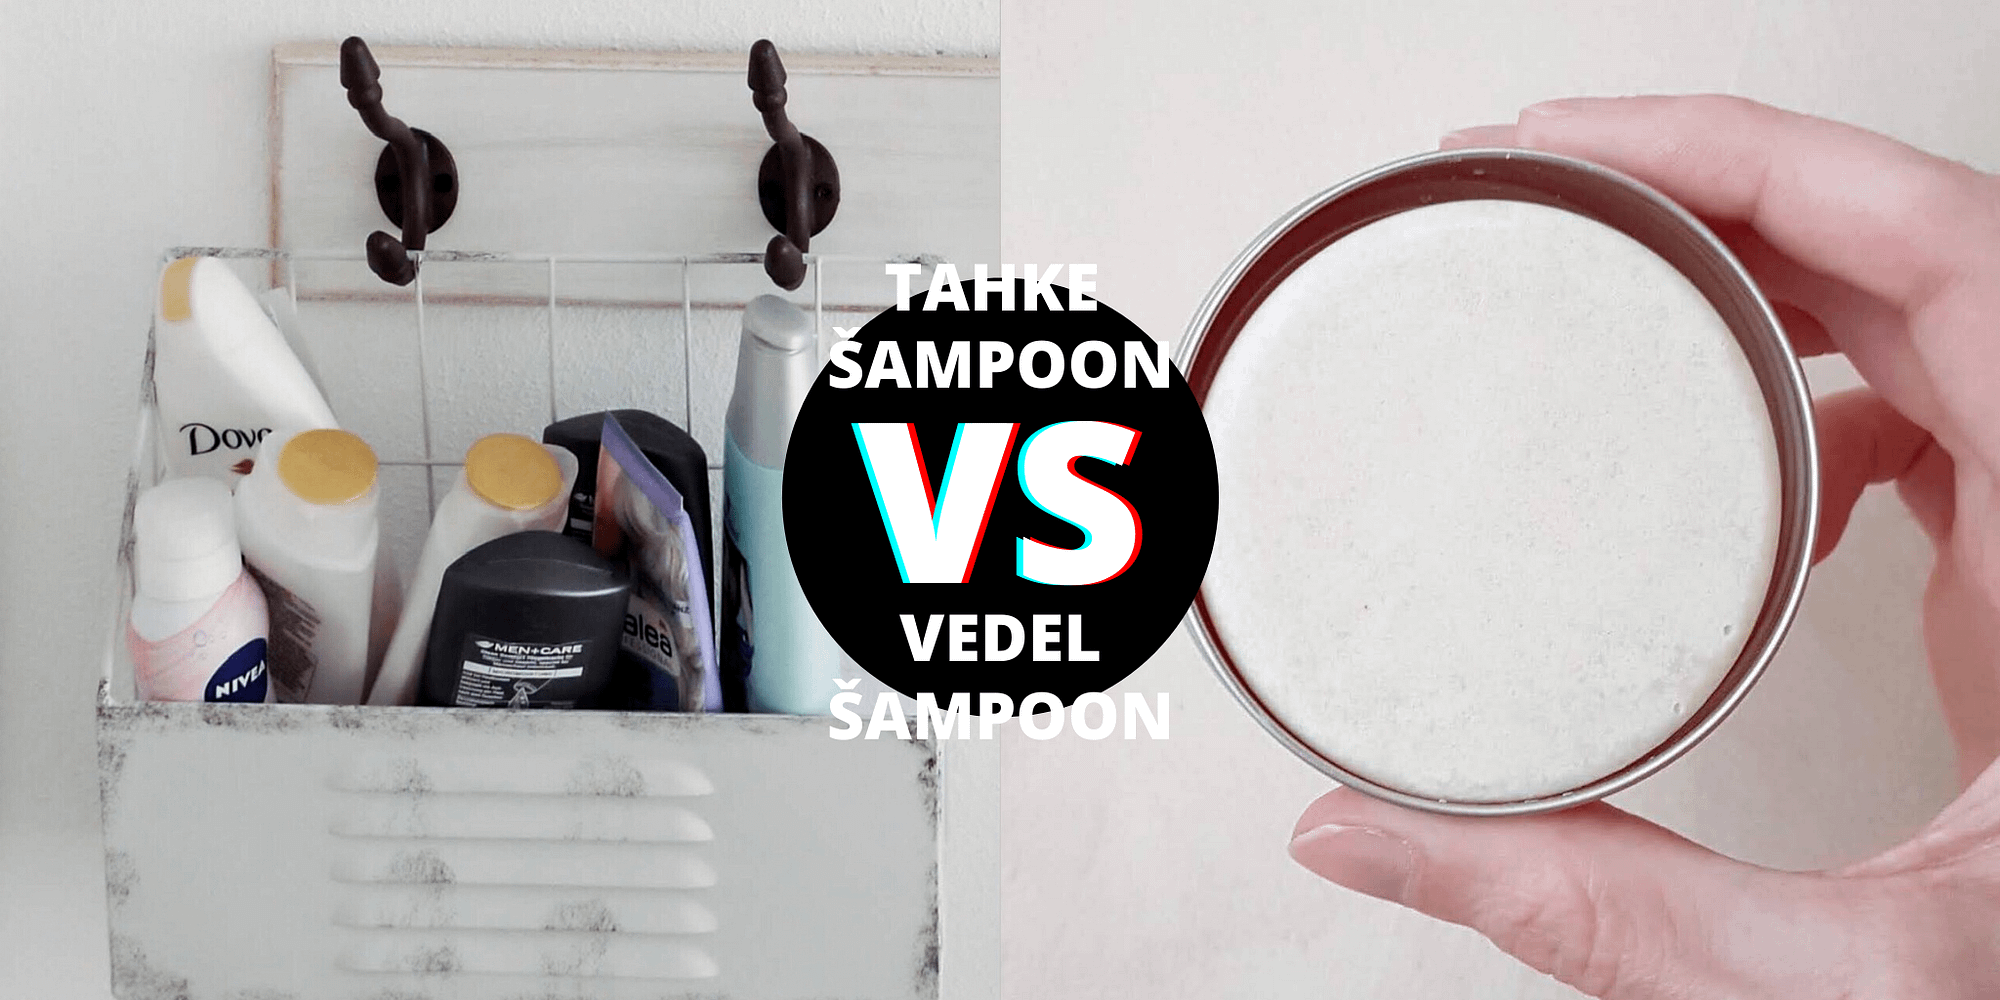 You are currently viewing Tahke šampoon vs vedel šampoon